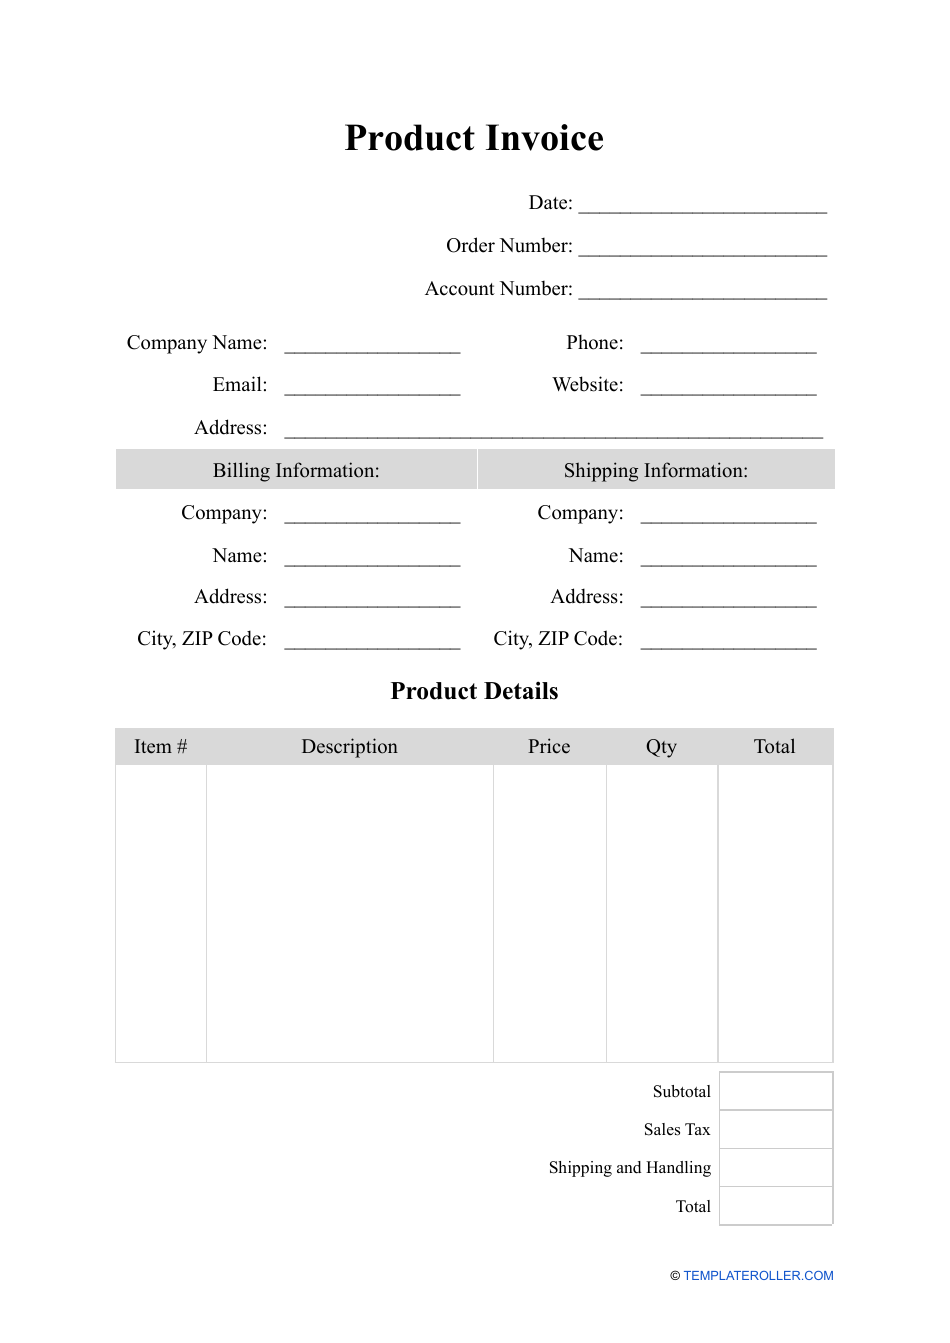 Product Invoice Template, Page 1